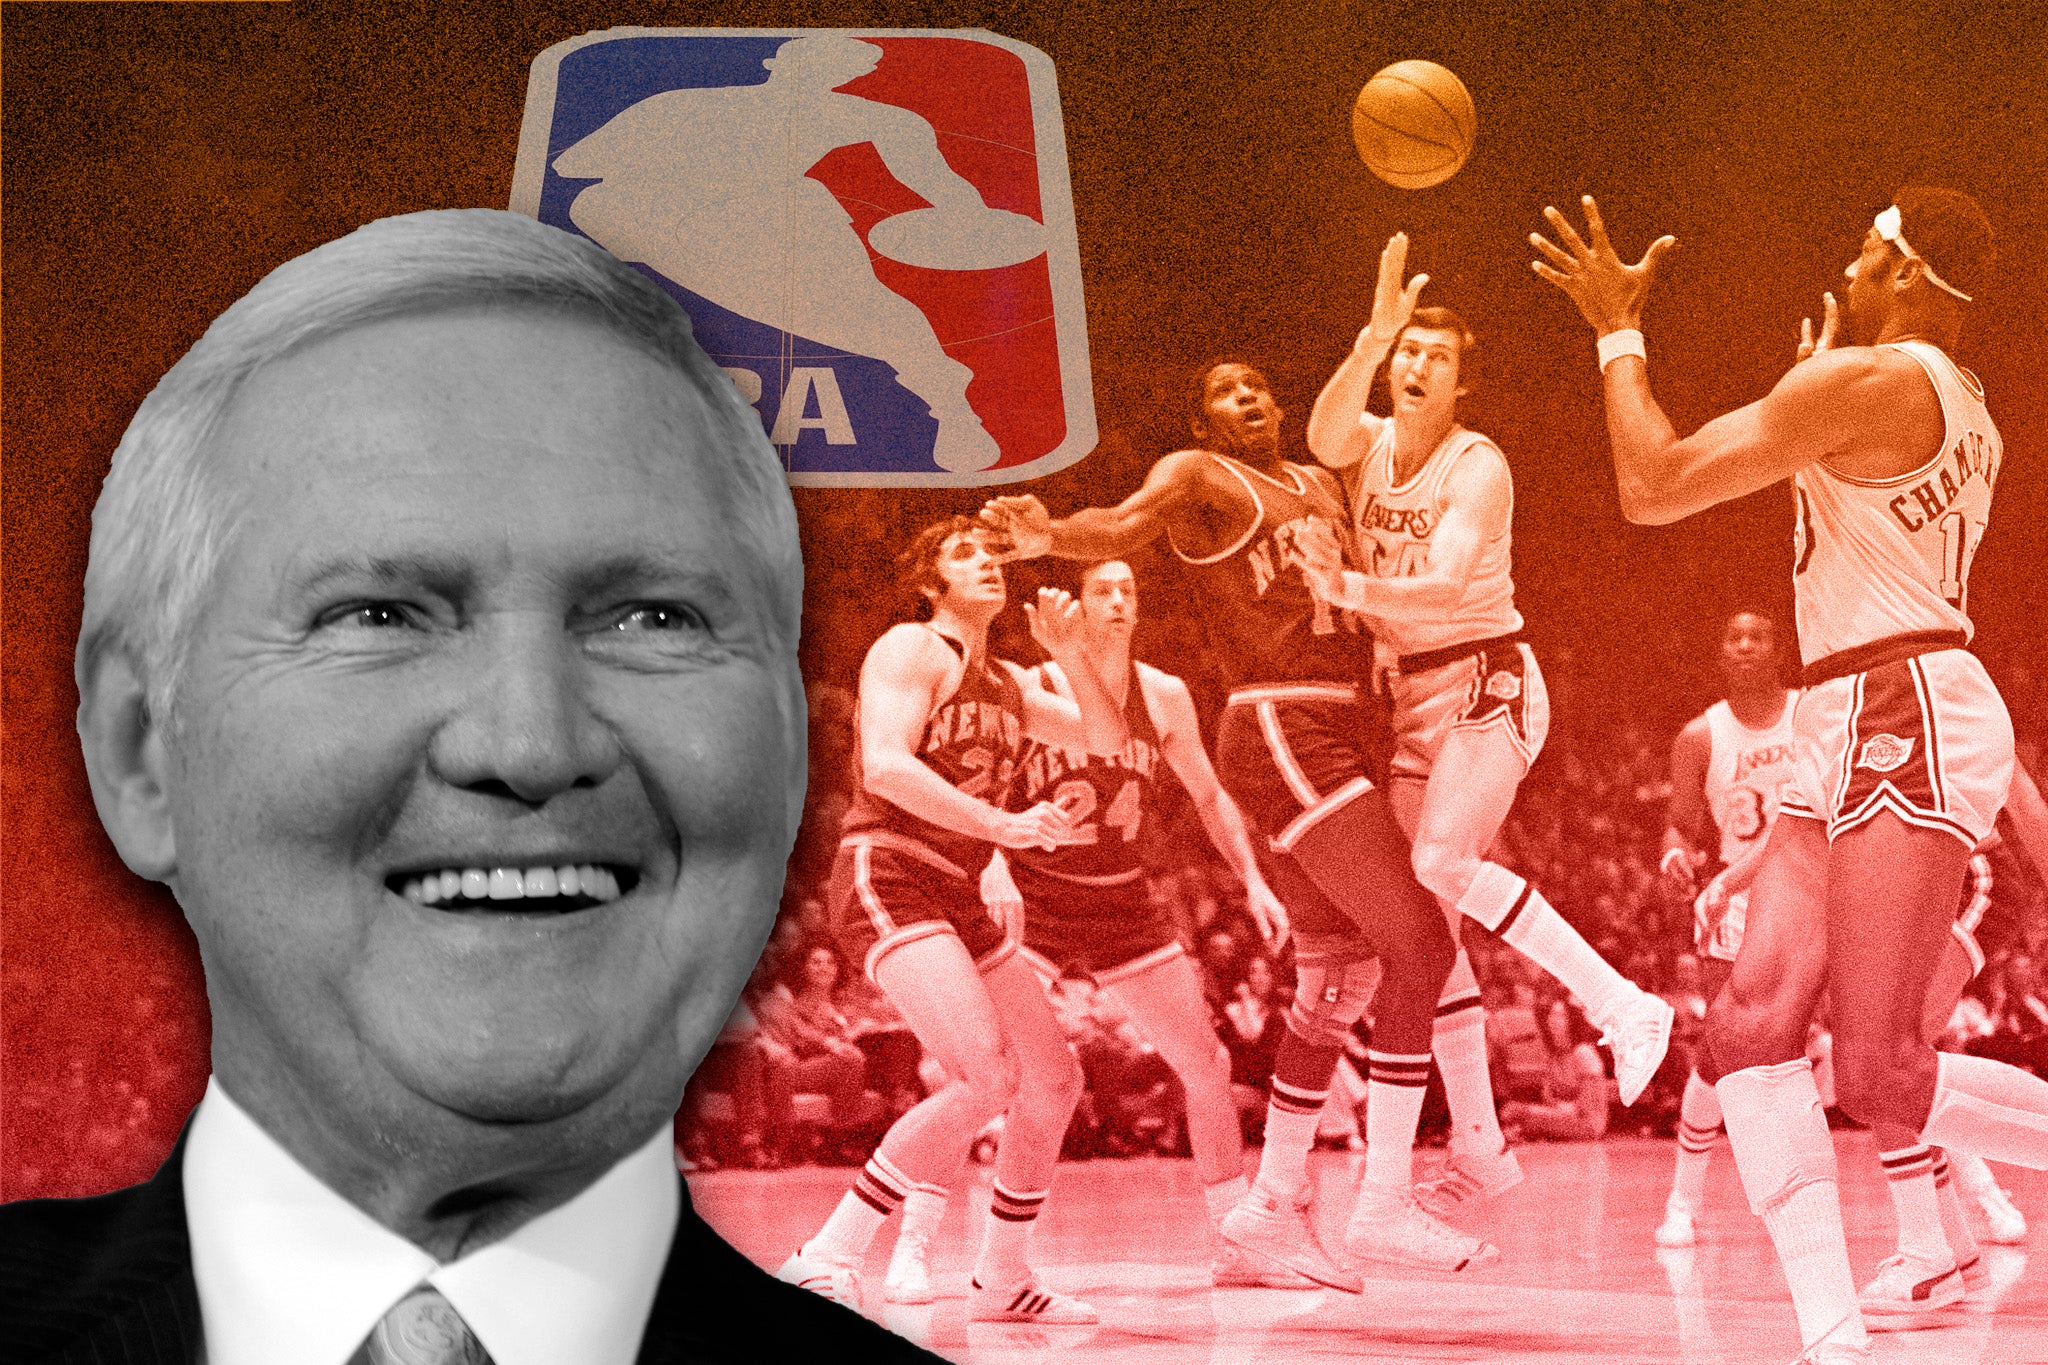 NBA great Jerry West